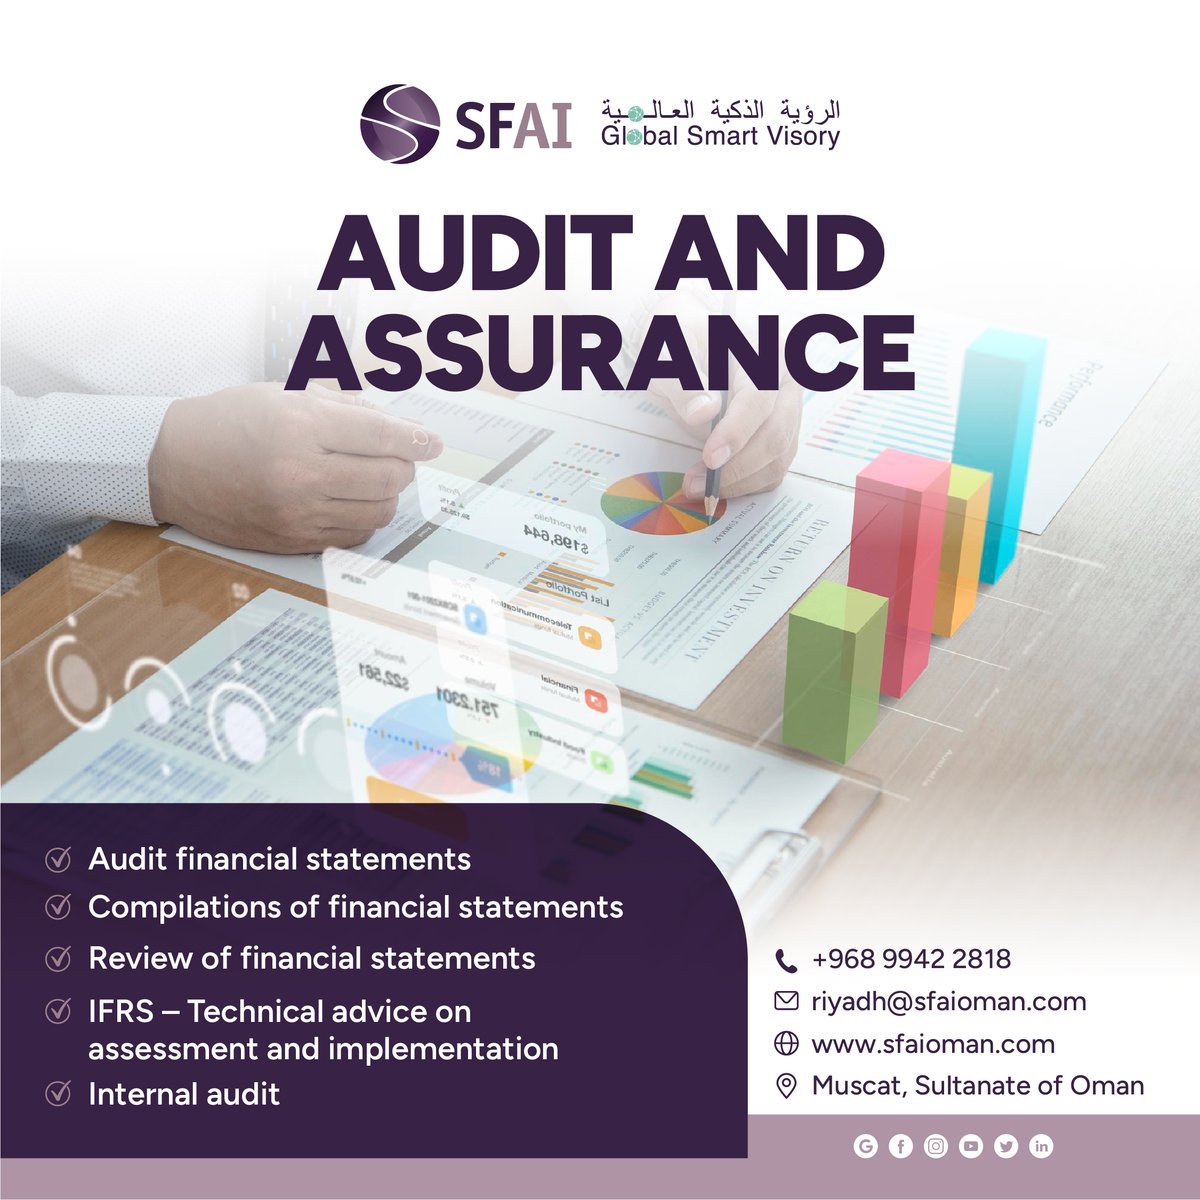 Need expert Assurance & Audit solutions? Look no further! Our team at SFAI Global Smart Visory specializes in financial statements audit, agreed-upon procedures, and IFRS technical advice. Trust us for accurate and reliable services. #FinancialAudit #IFRSTechnicalAdvice